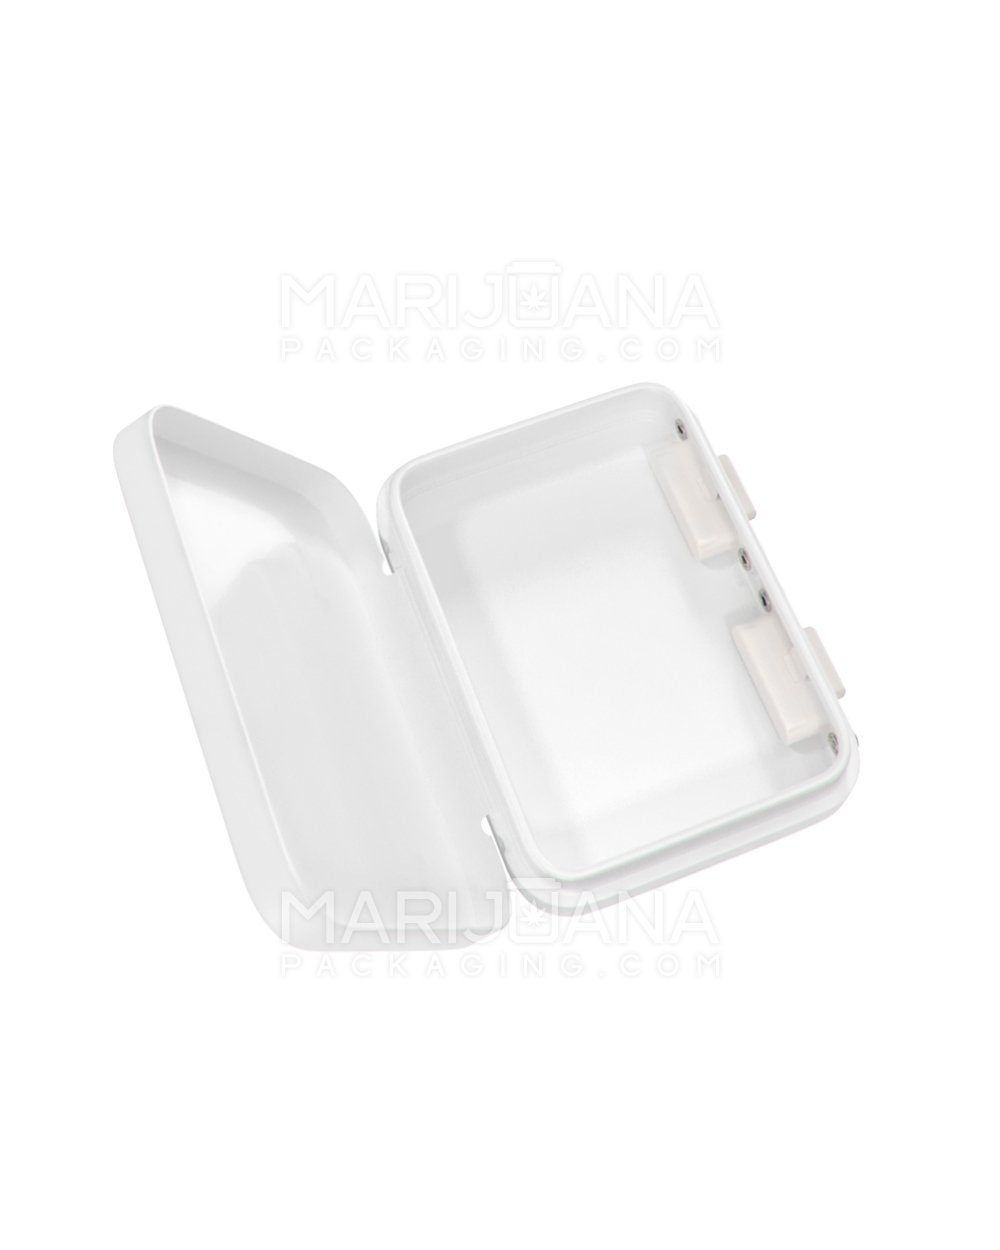 Custom 100% Recyclable Child Resistant Hinged-Lid Mini Pack Joint Box | 80mm x 61.5mm - White Tin - 6